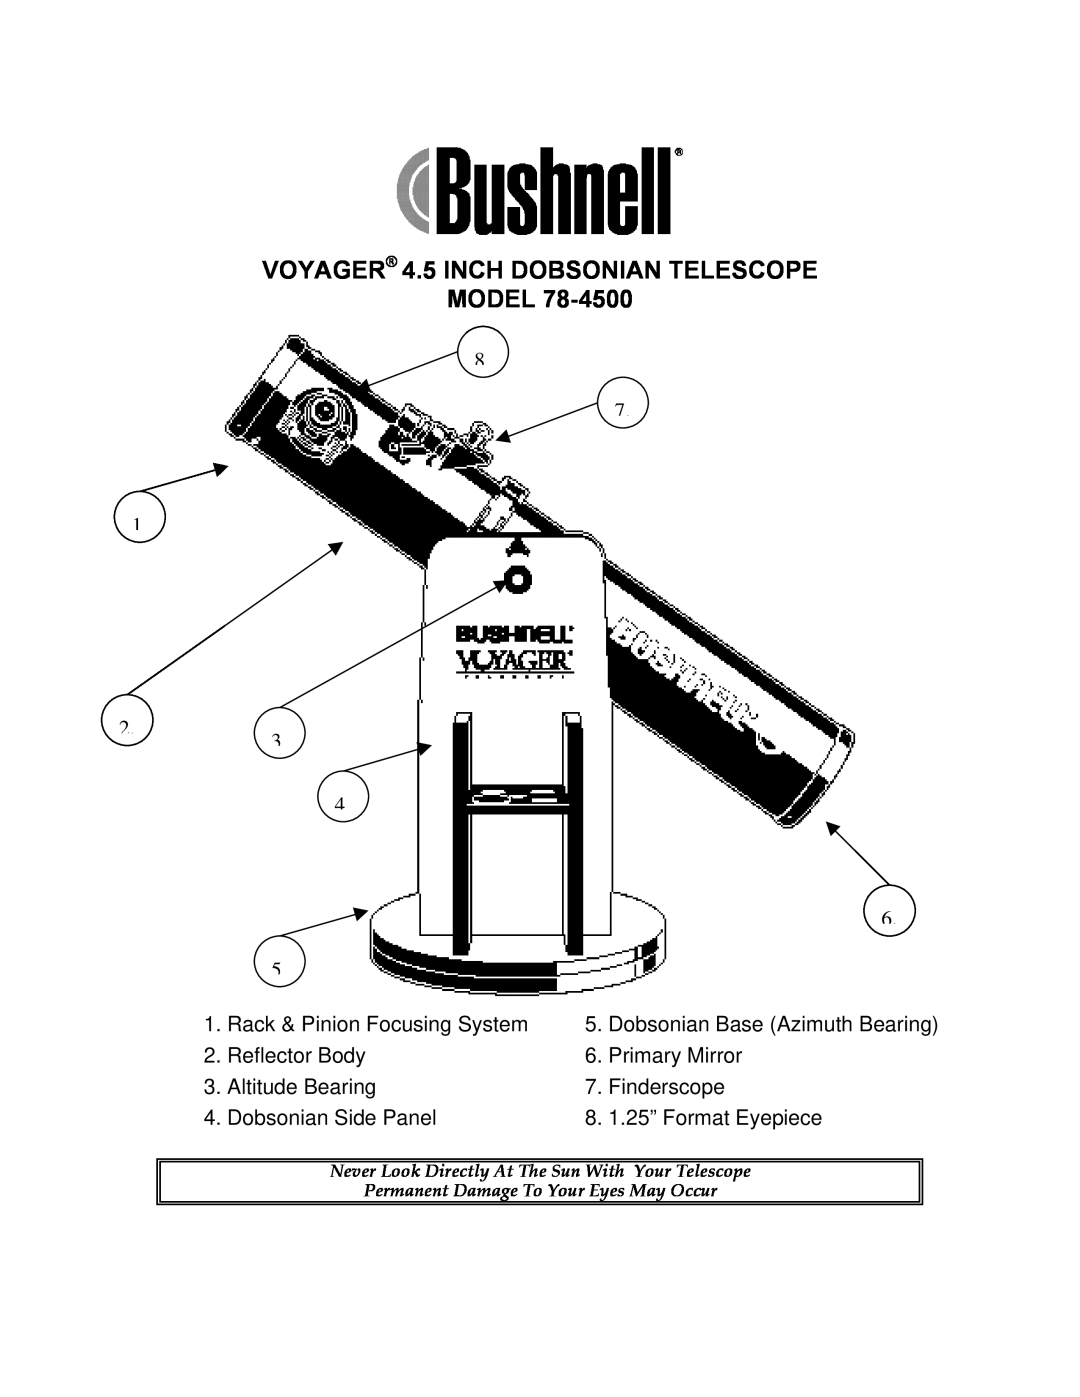 Bushnell 78-4500 manual VOYAGER 4.5 INCH DOBSONIAN TELESCOPE MODEL, Rack & Pinion Focusing System, Reflector Body 